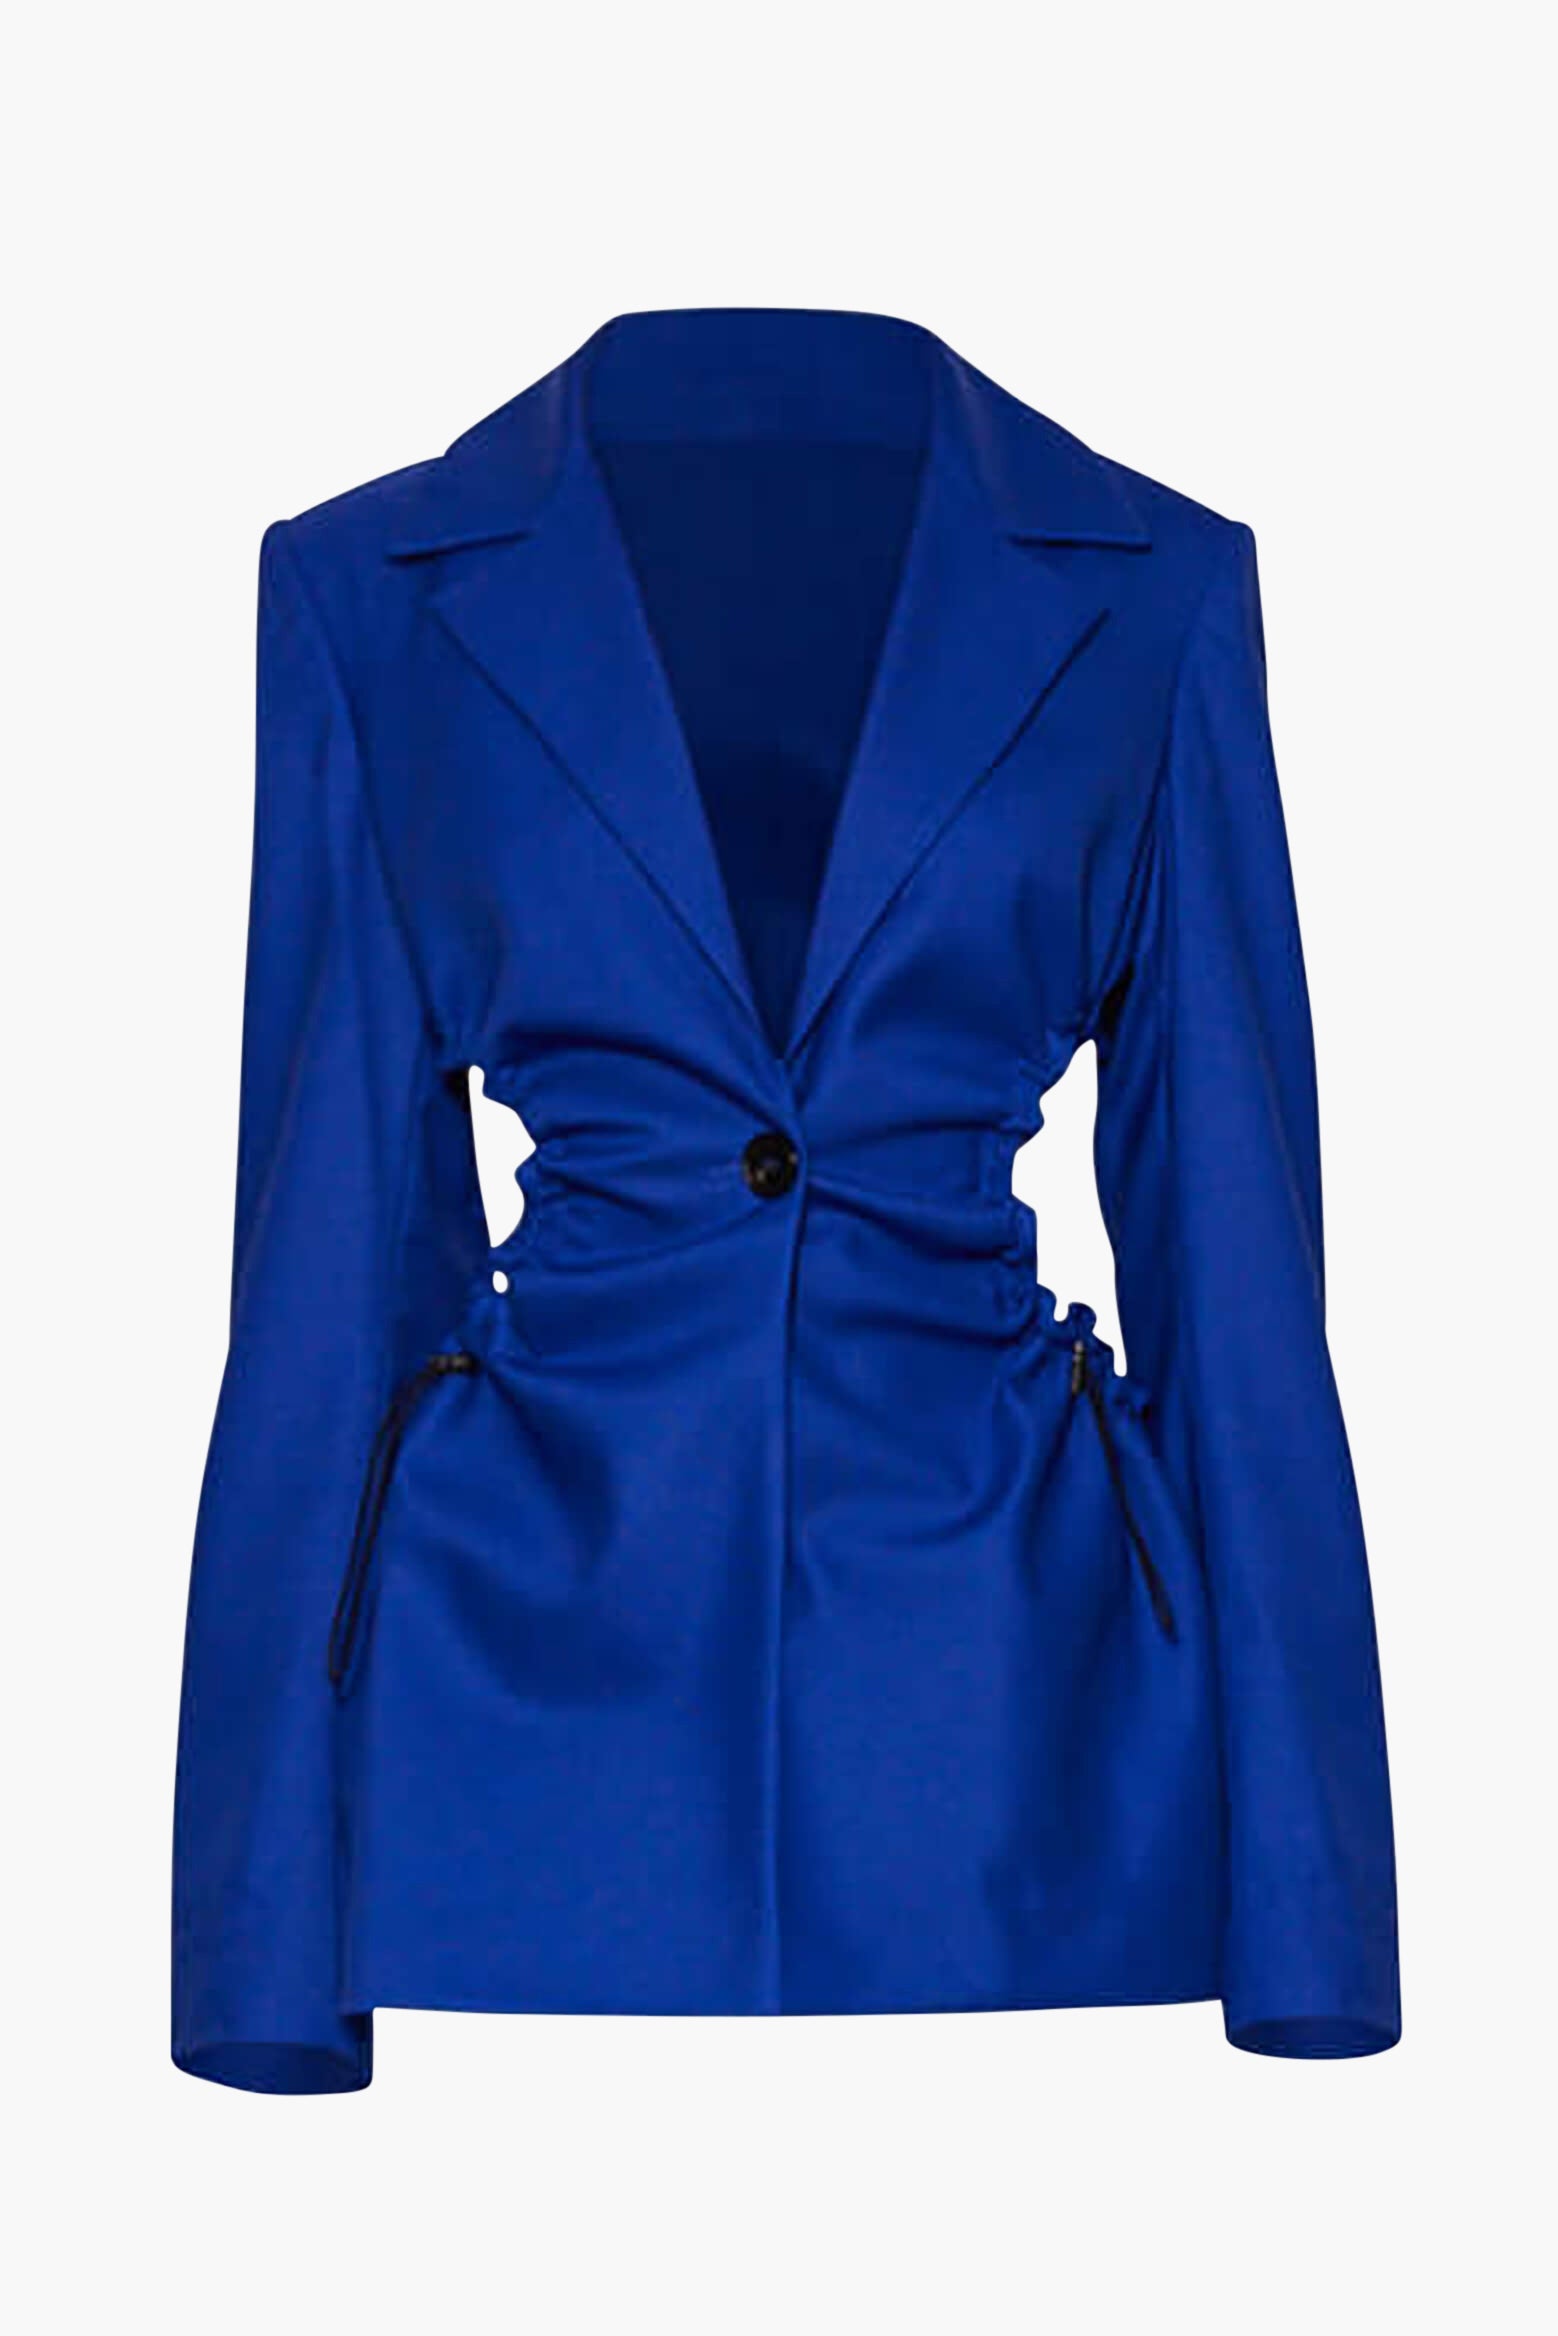 Wynn Hamlyn Bungy Blazer in Persian Blue available at TNT The New Trend.